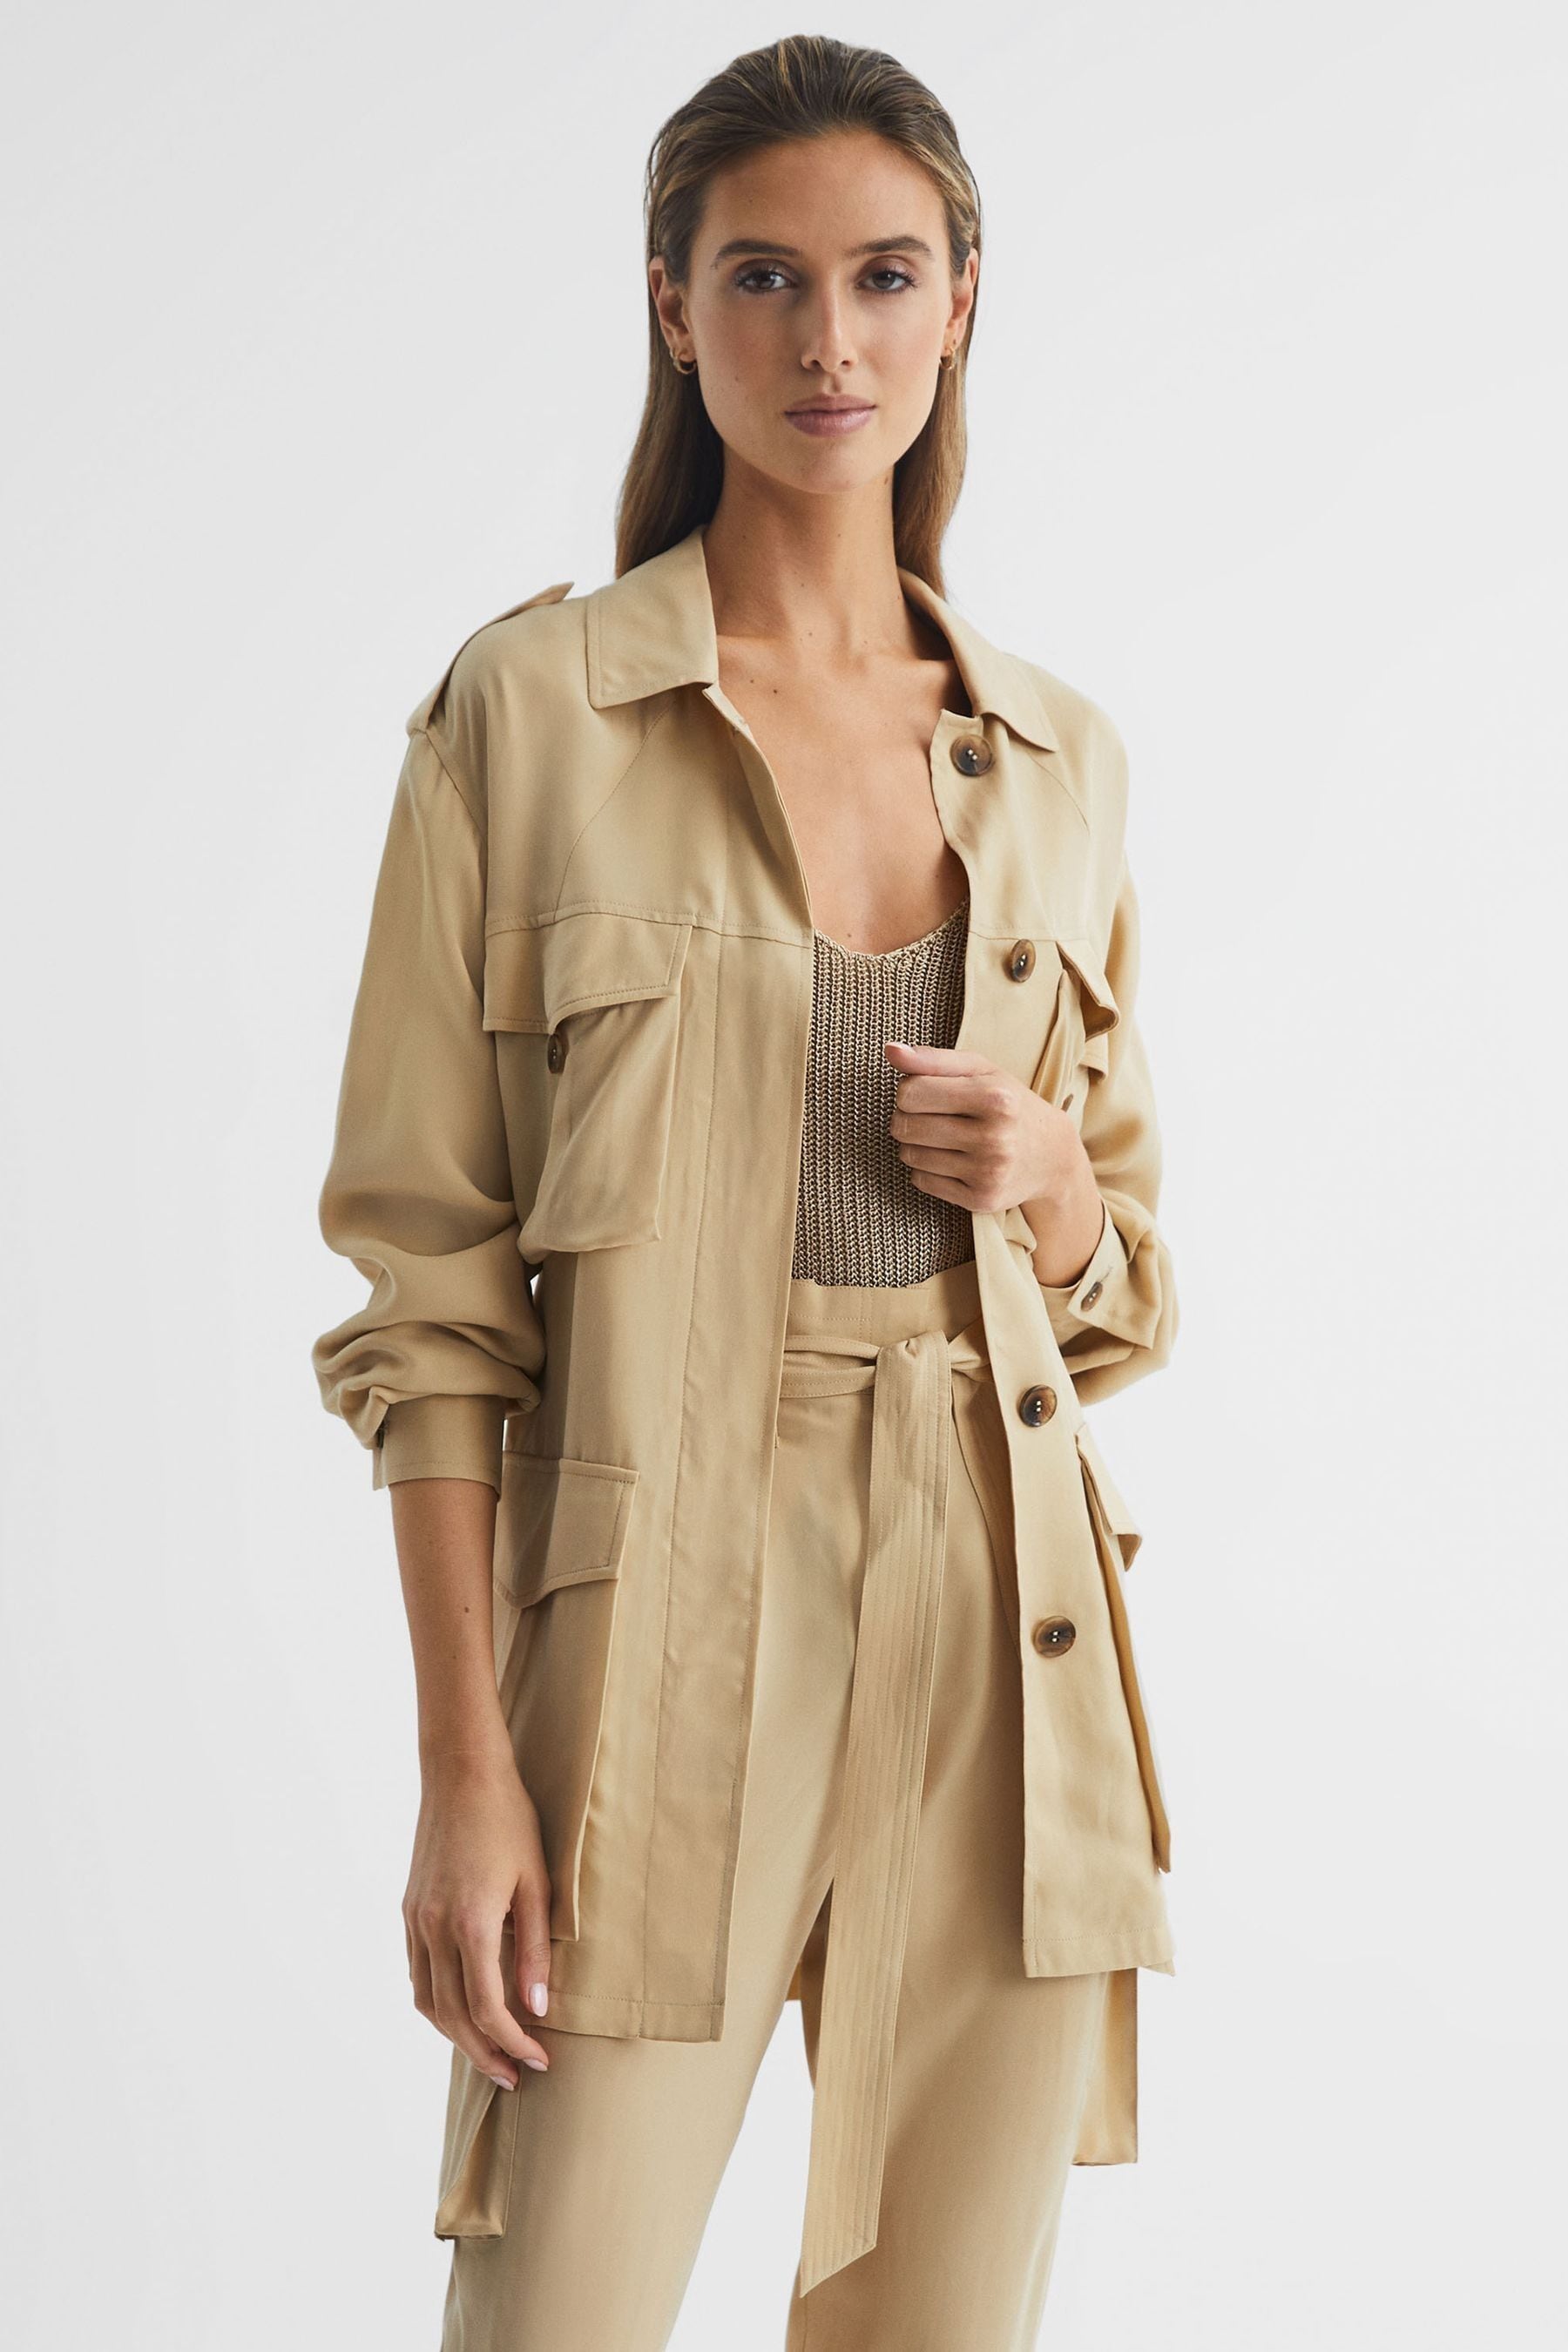 Joanie - Neutral Relaxed Fit...